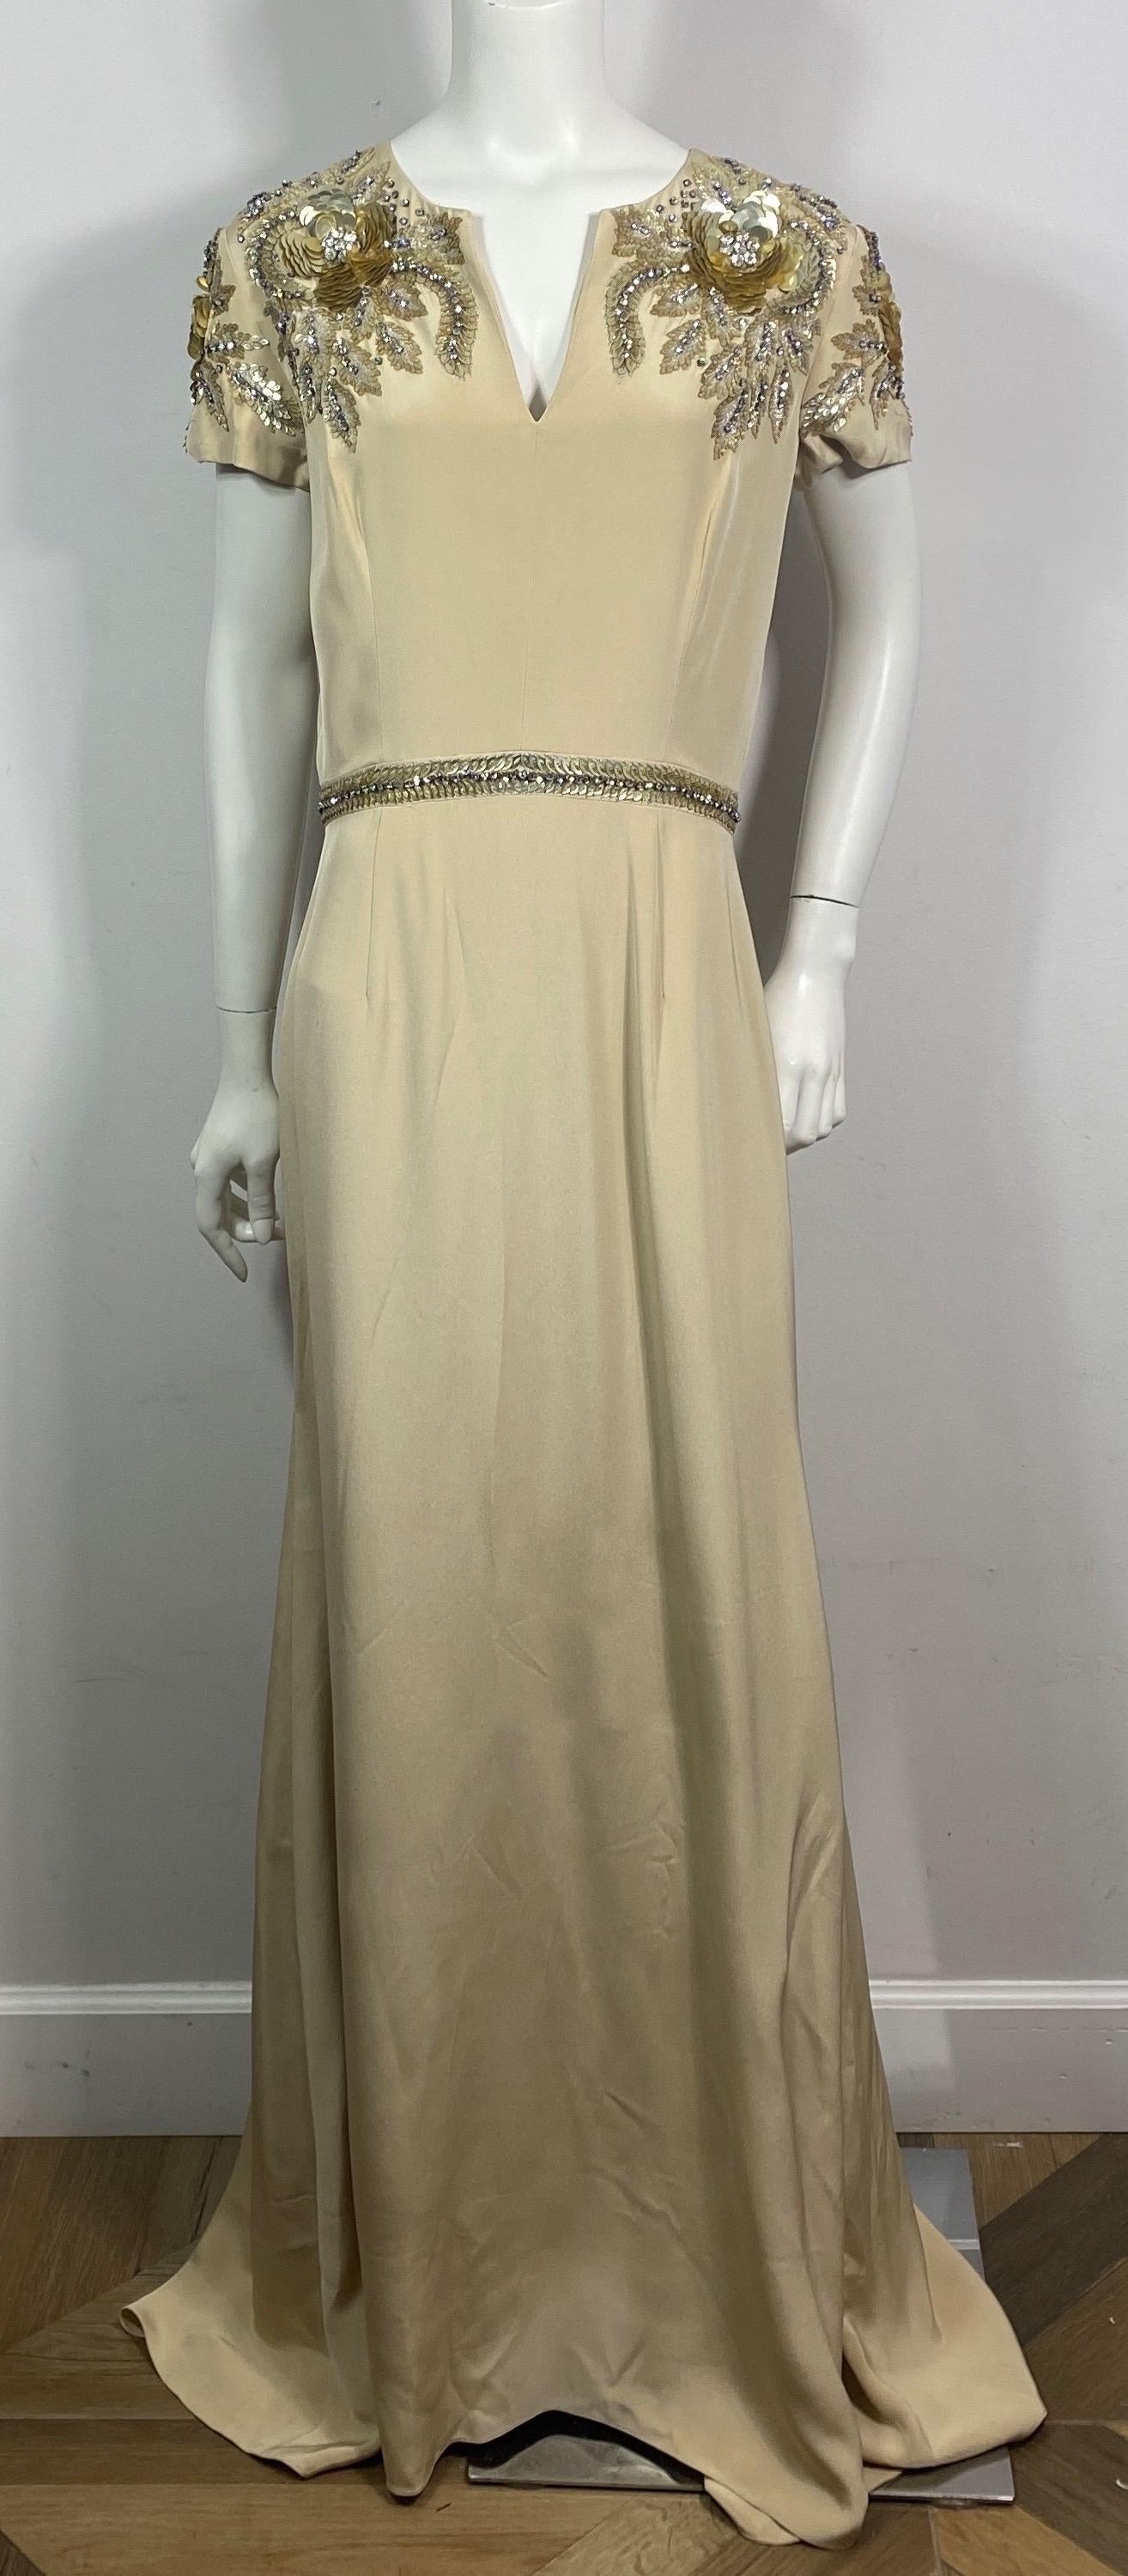 Naeem Kahn Heavily Embellished Champagne Silk Gown-Size 10  This spectacular Naeem Kahn creation is made of a wonderful champagne colored heavy silk and is lined in an additional layer of a lighter colored silk. The gown has a short cap sleeve and